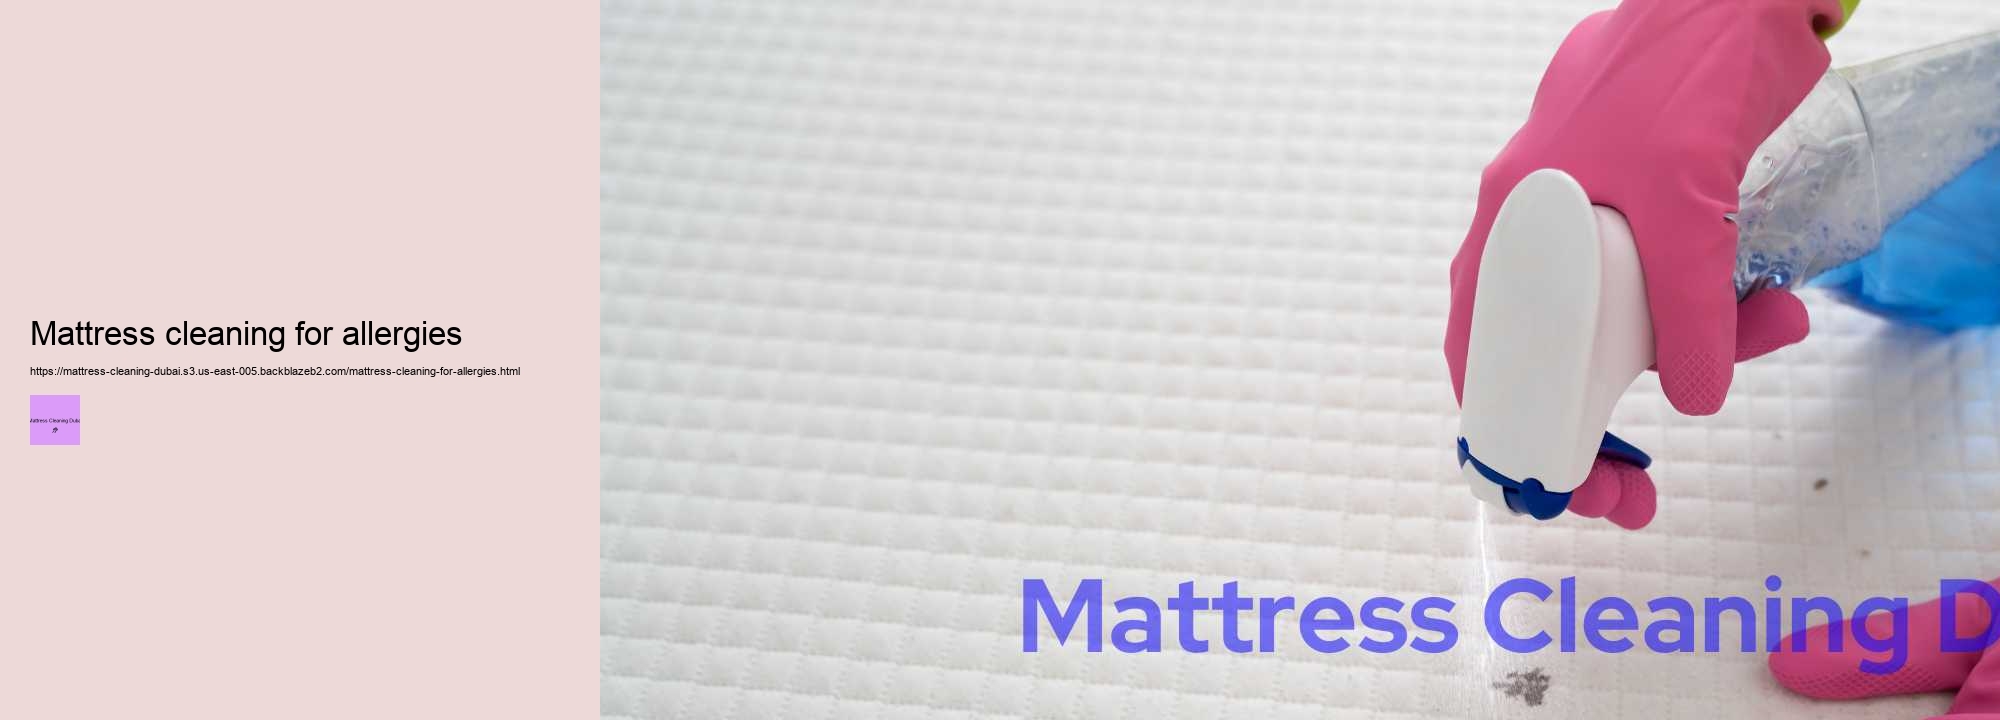 Mattress cleaning for allergies